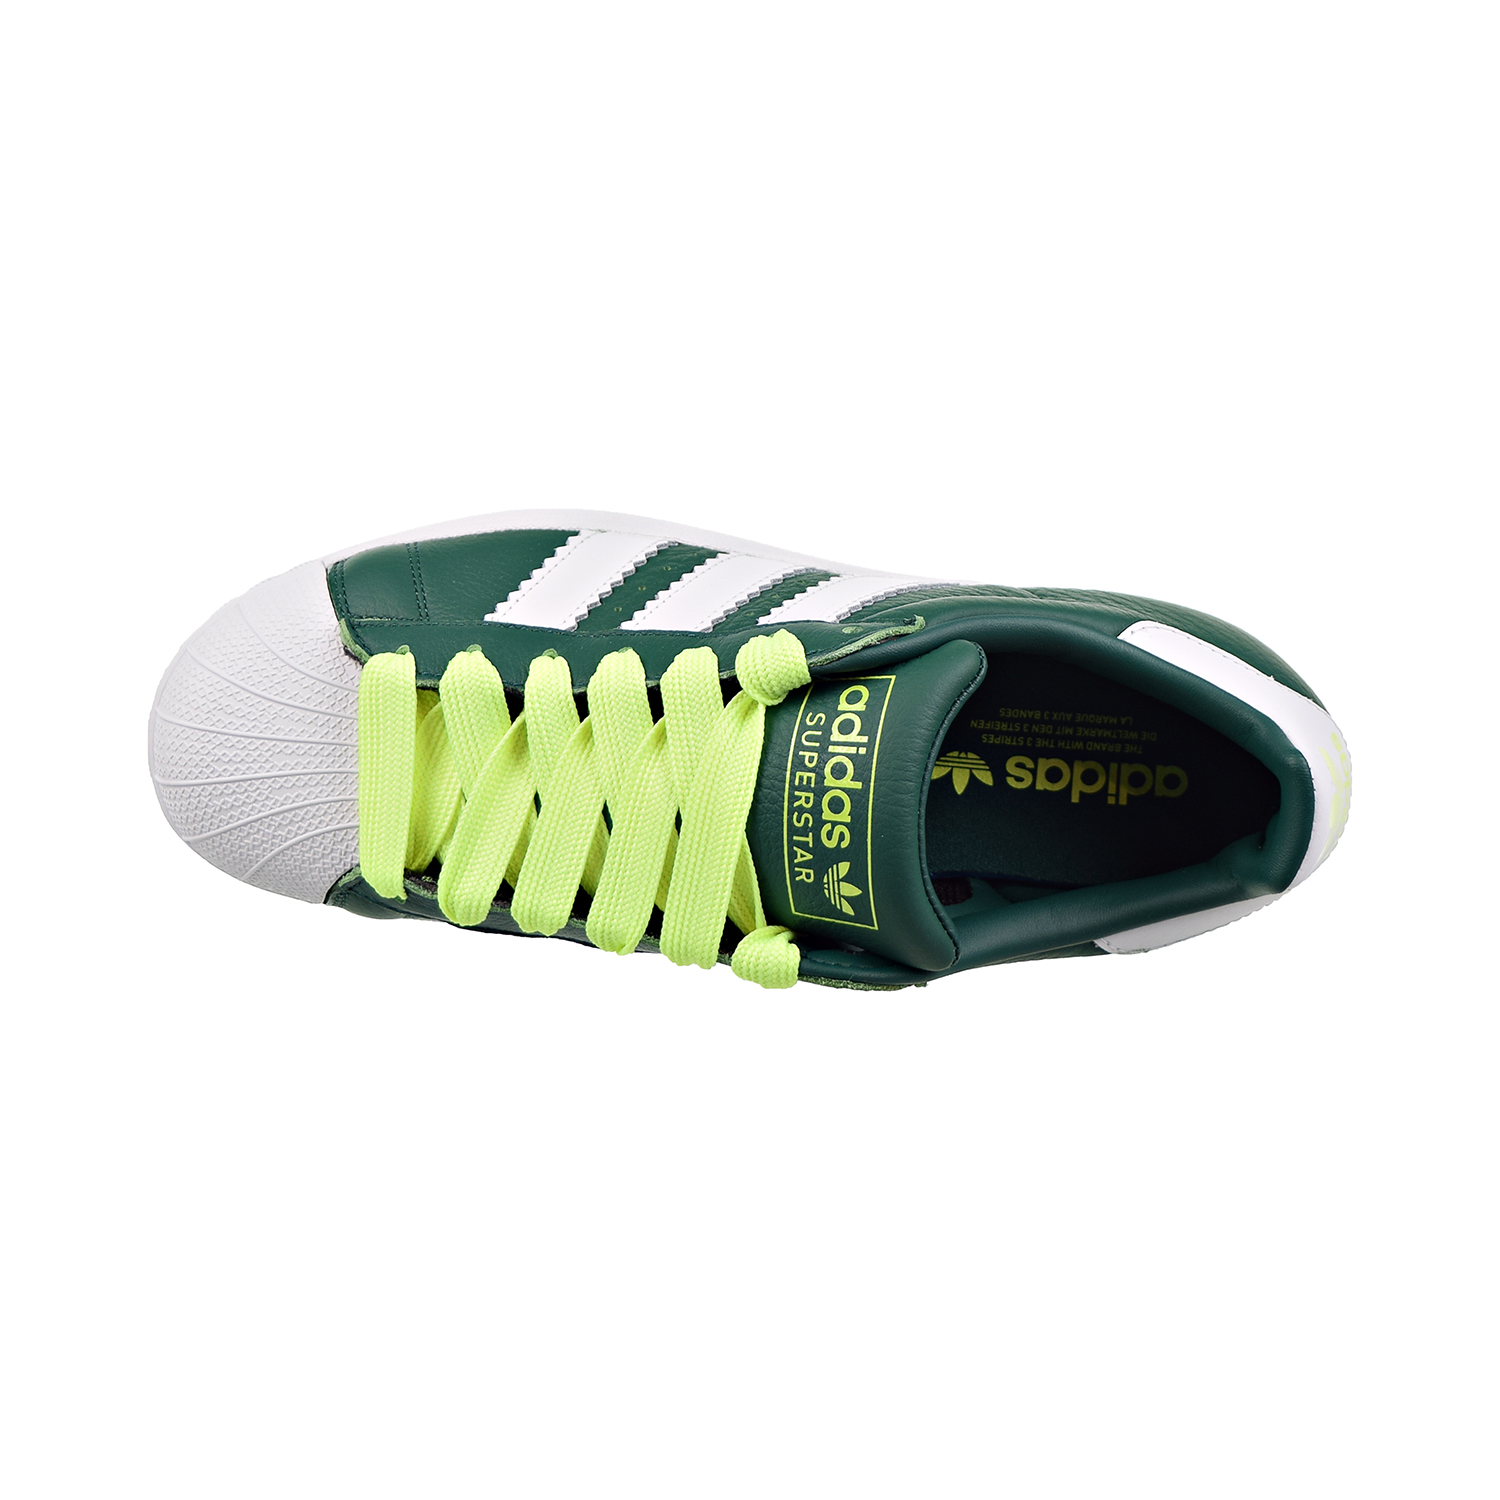 Adidas Superstar Mens Shoes Collegiate Green-Cloud White-Hi-Res Yellow ...